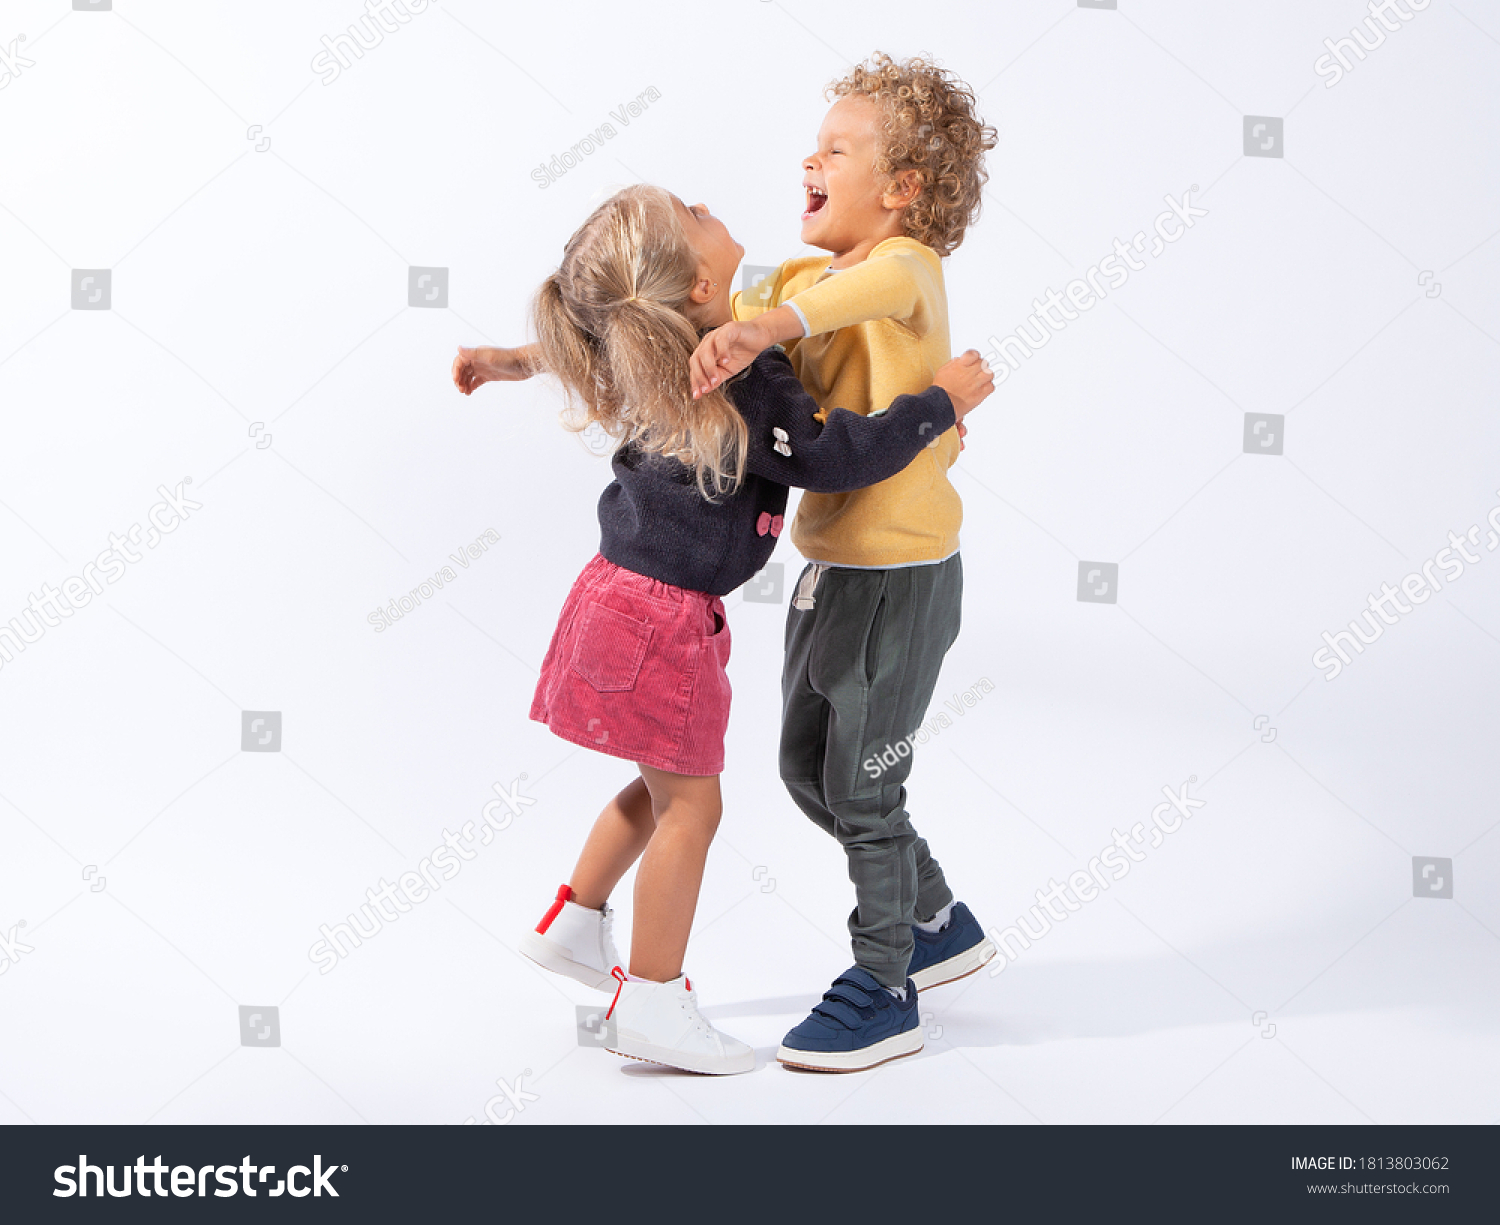 Beautiful European children-brother 4 years old and sister 3 years old on a white background hug, laugh, have fun, indulge. In full growth. The children are tanned and curly-haired. #1813803062